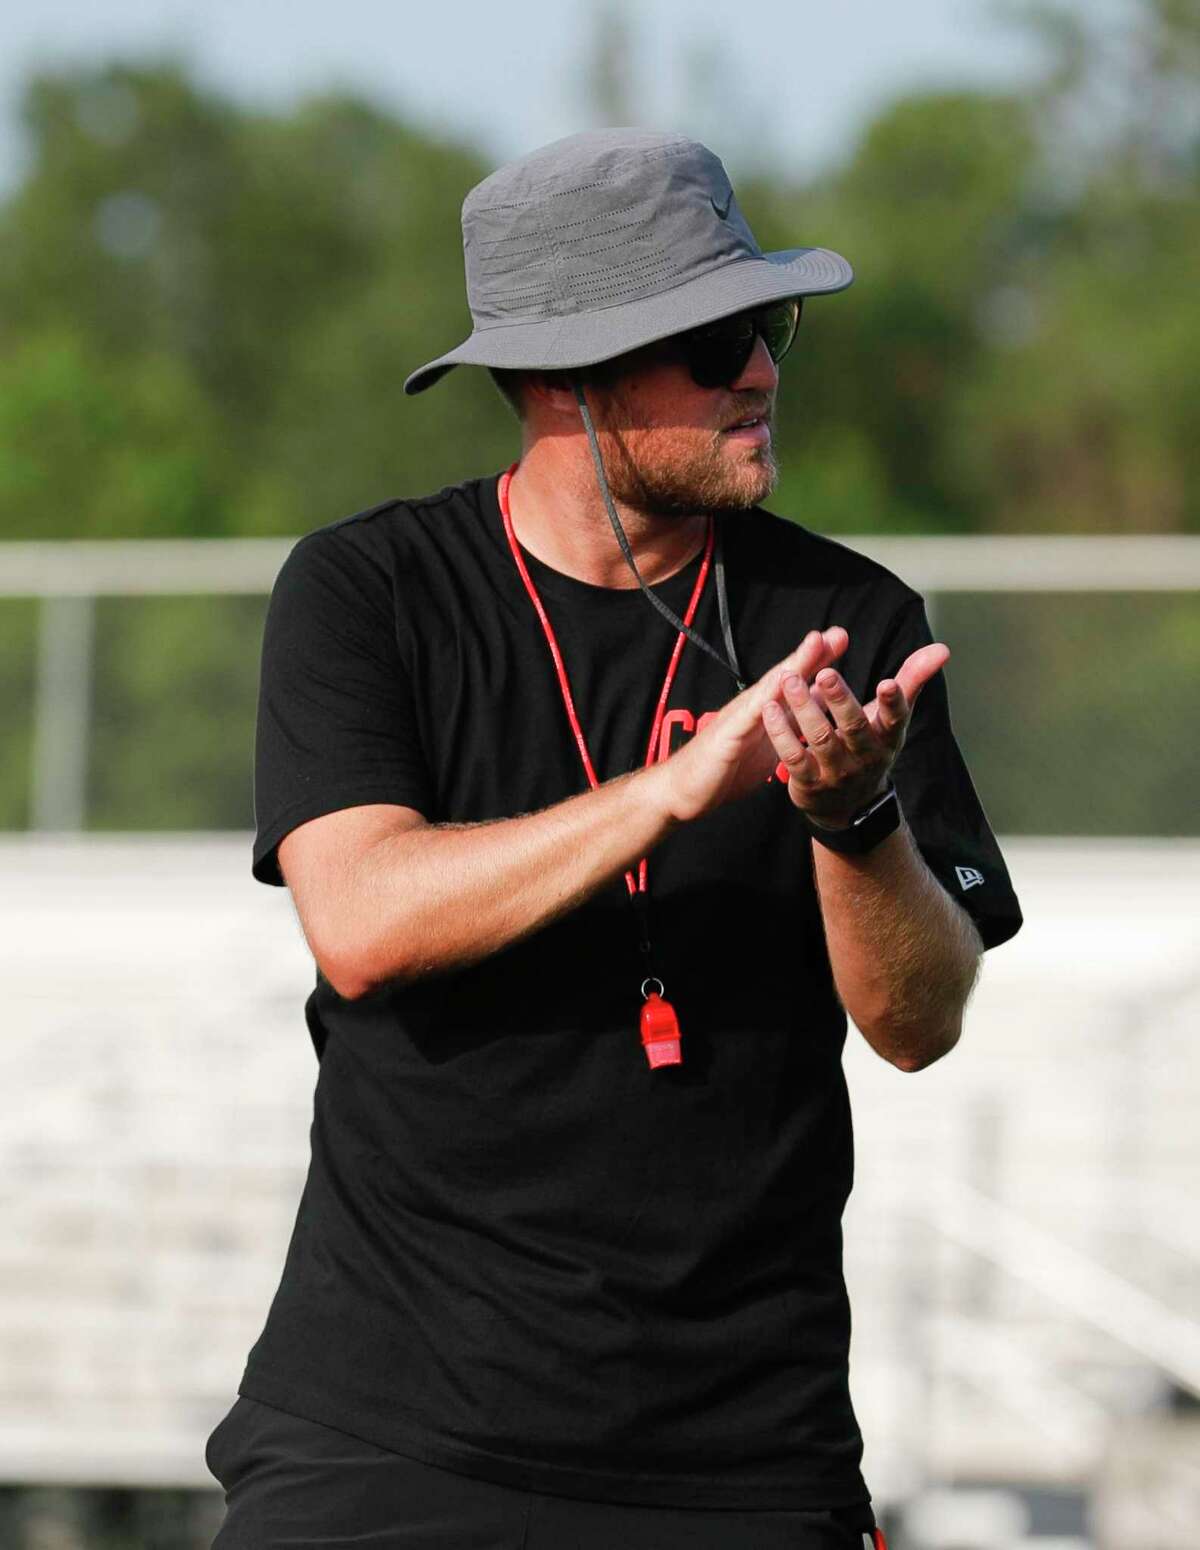 Caney Creek head coach Kendall Hineman encourages players during football practice at Caney Creek High School, Tuesday, Aug. 3, 2021, in Conroe.